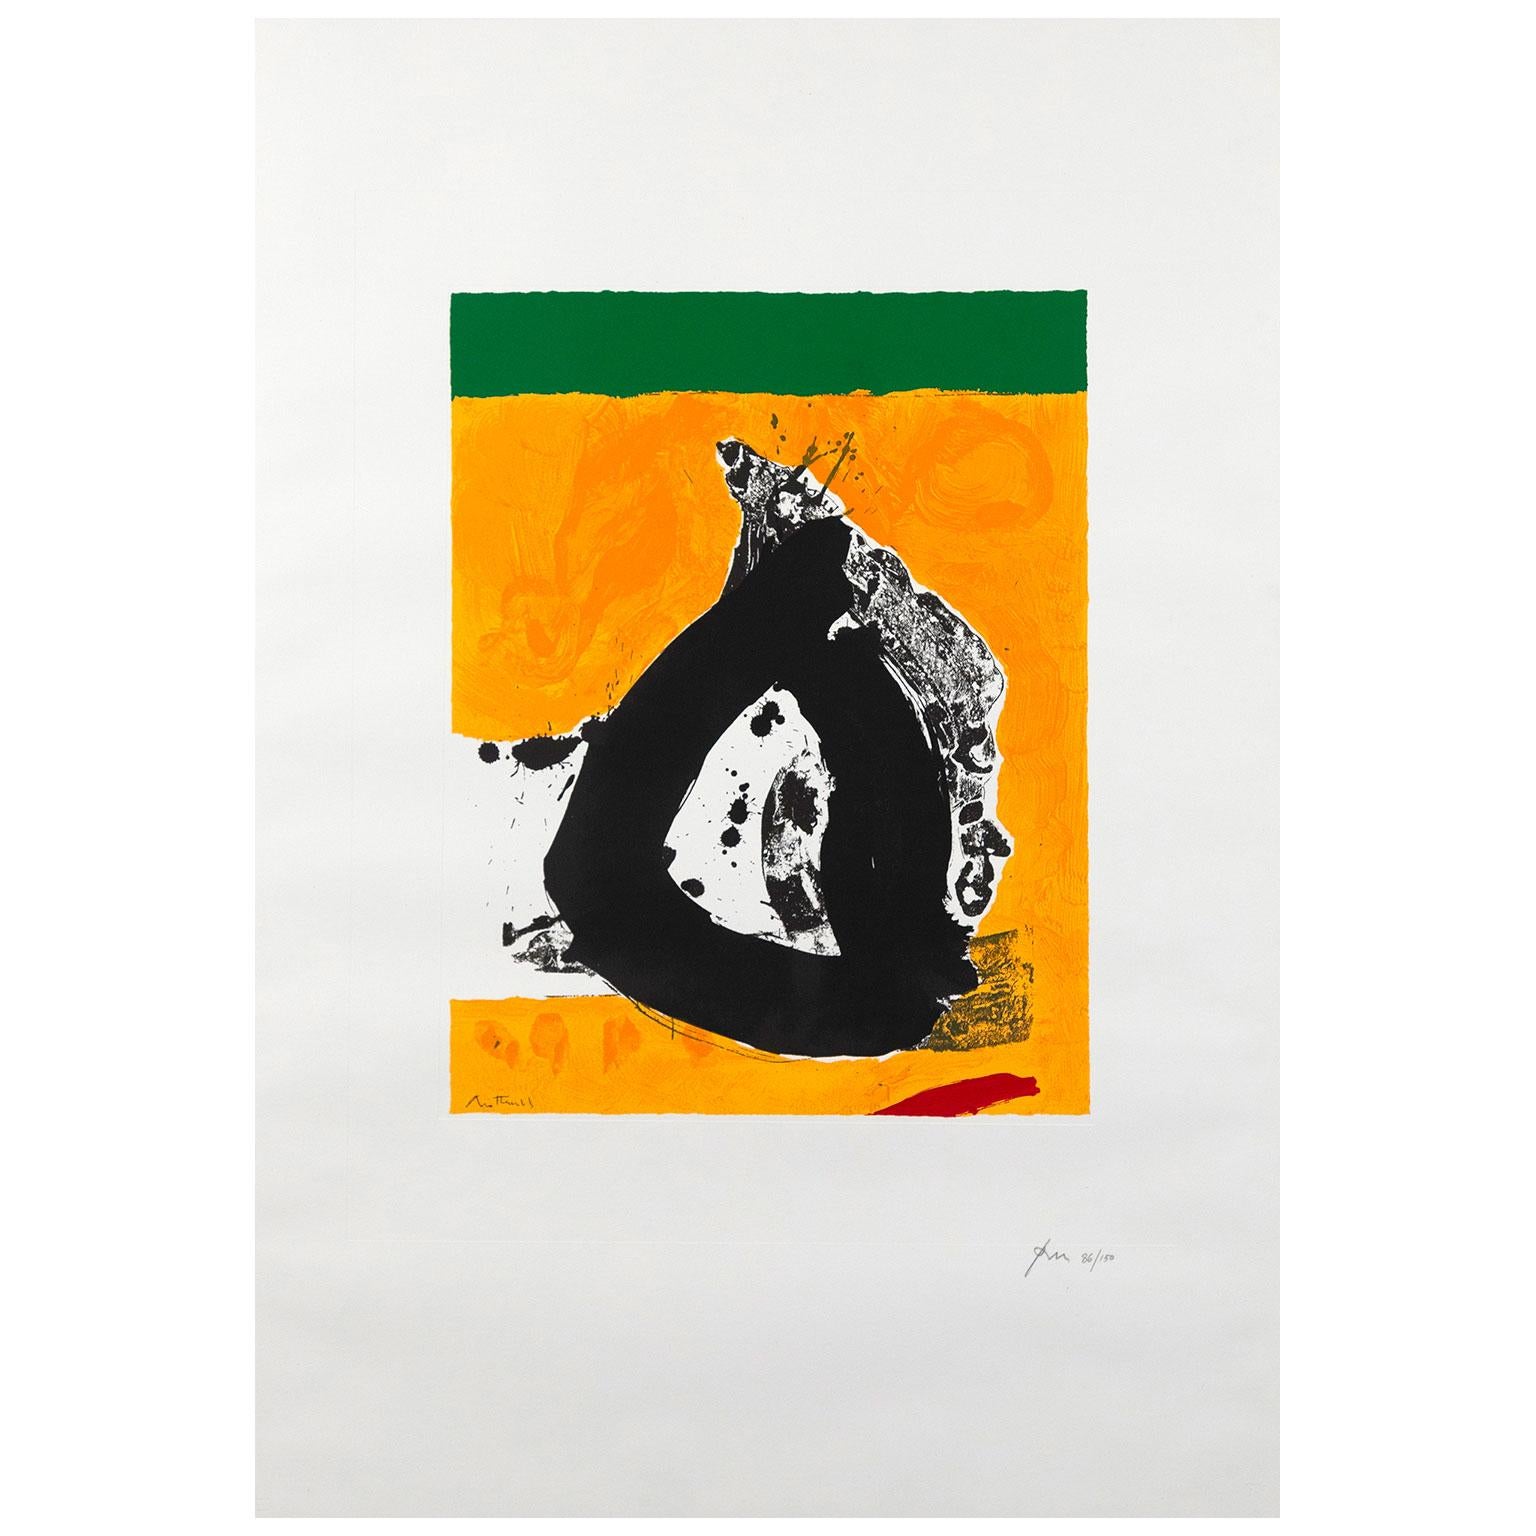 Robert Motherwell (1915-1991), alongside Jackson Pollock, Mark Rothko, and Willem de Kooning, made up the quartet of abstract painters that radically defined Modern painting in America and established New York City as the new center of the art